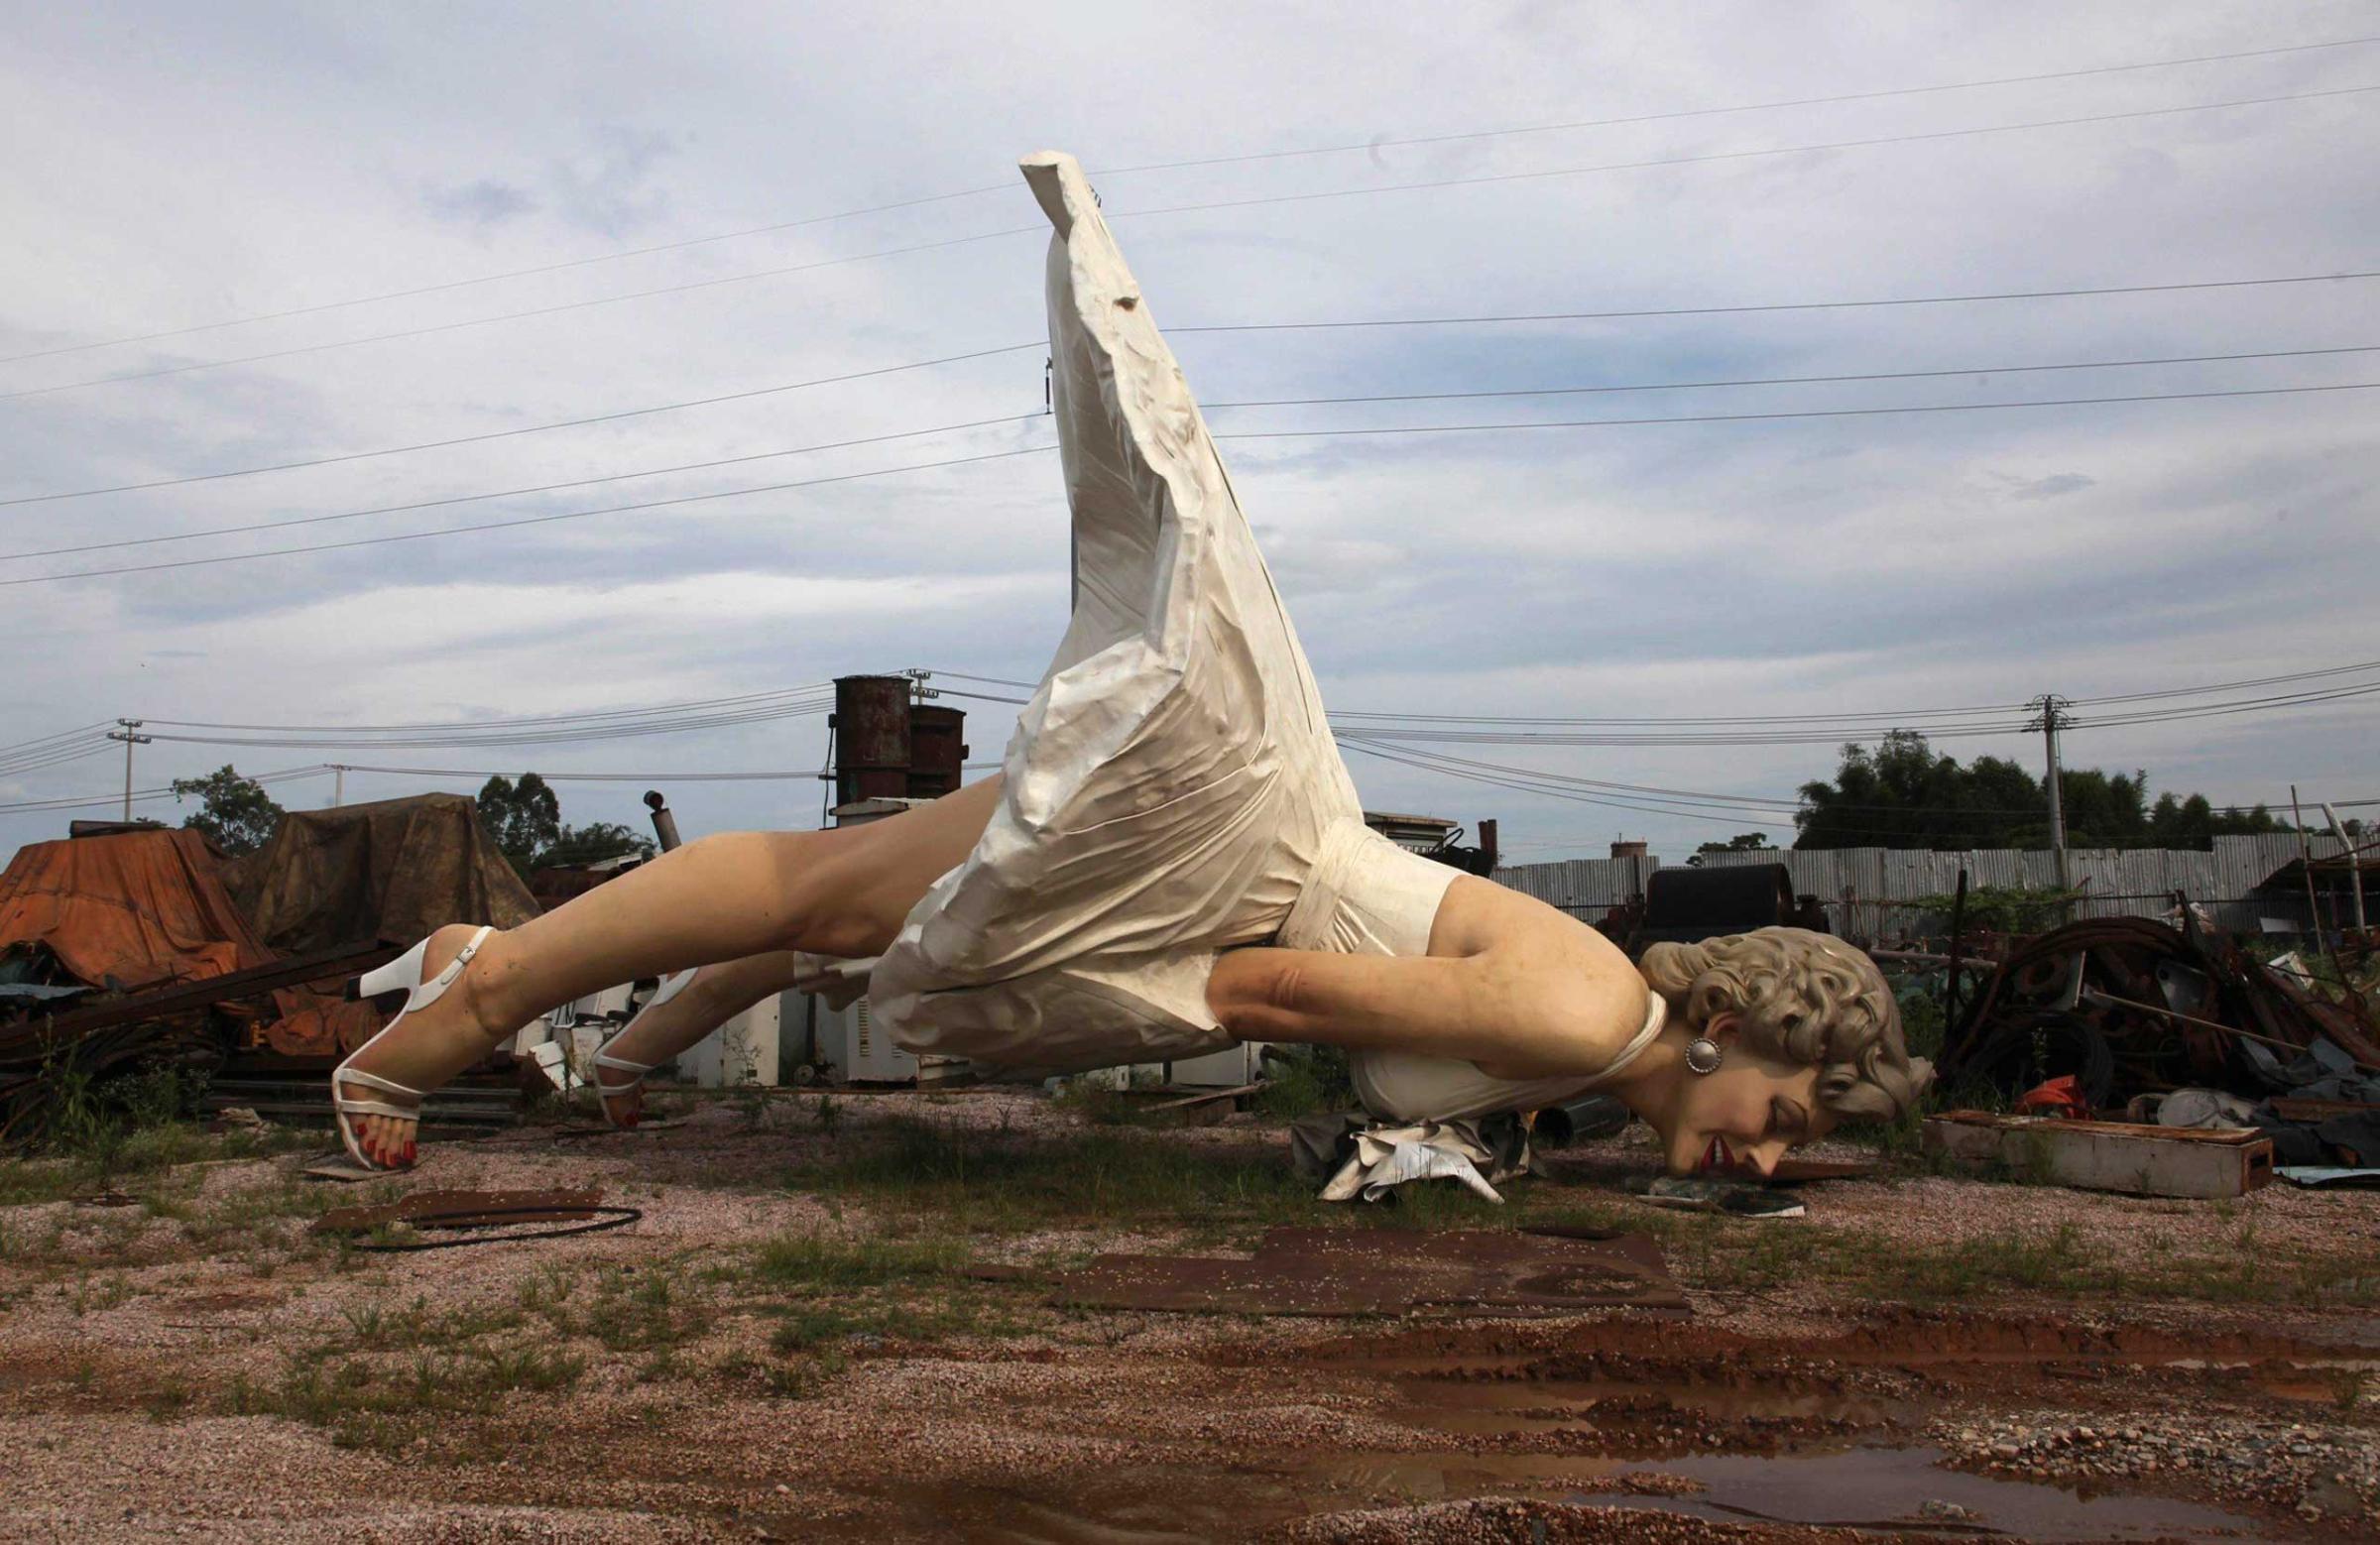 A giant statue of actress Marilyn Monroe is seen at the landfill site of a garbage collecting company in Guigang, Guangxi Zhuang Autonomous Region, China, June 18, 2014.